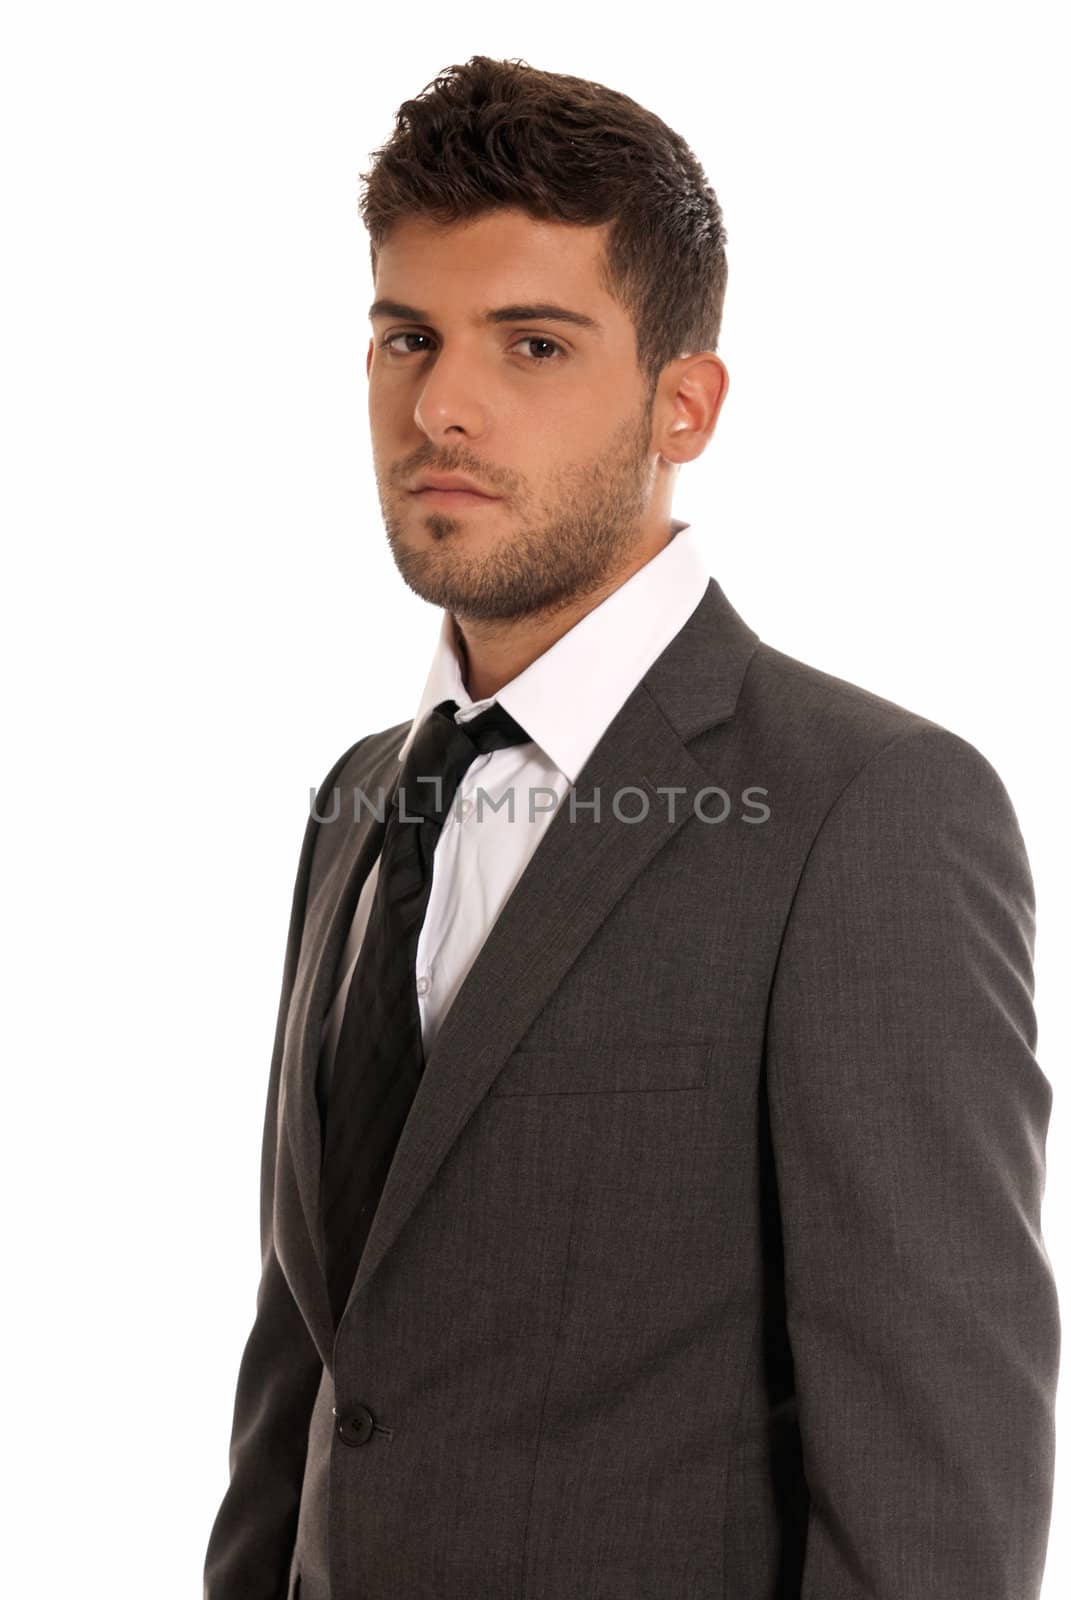 Young businessman looking serious isolated on white background